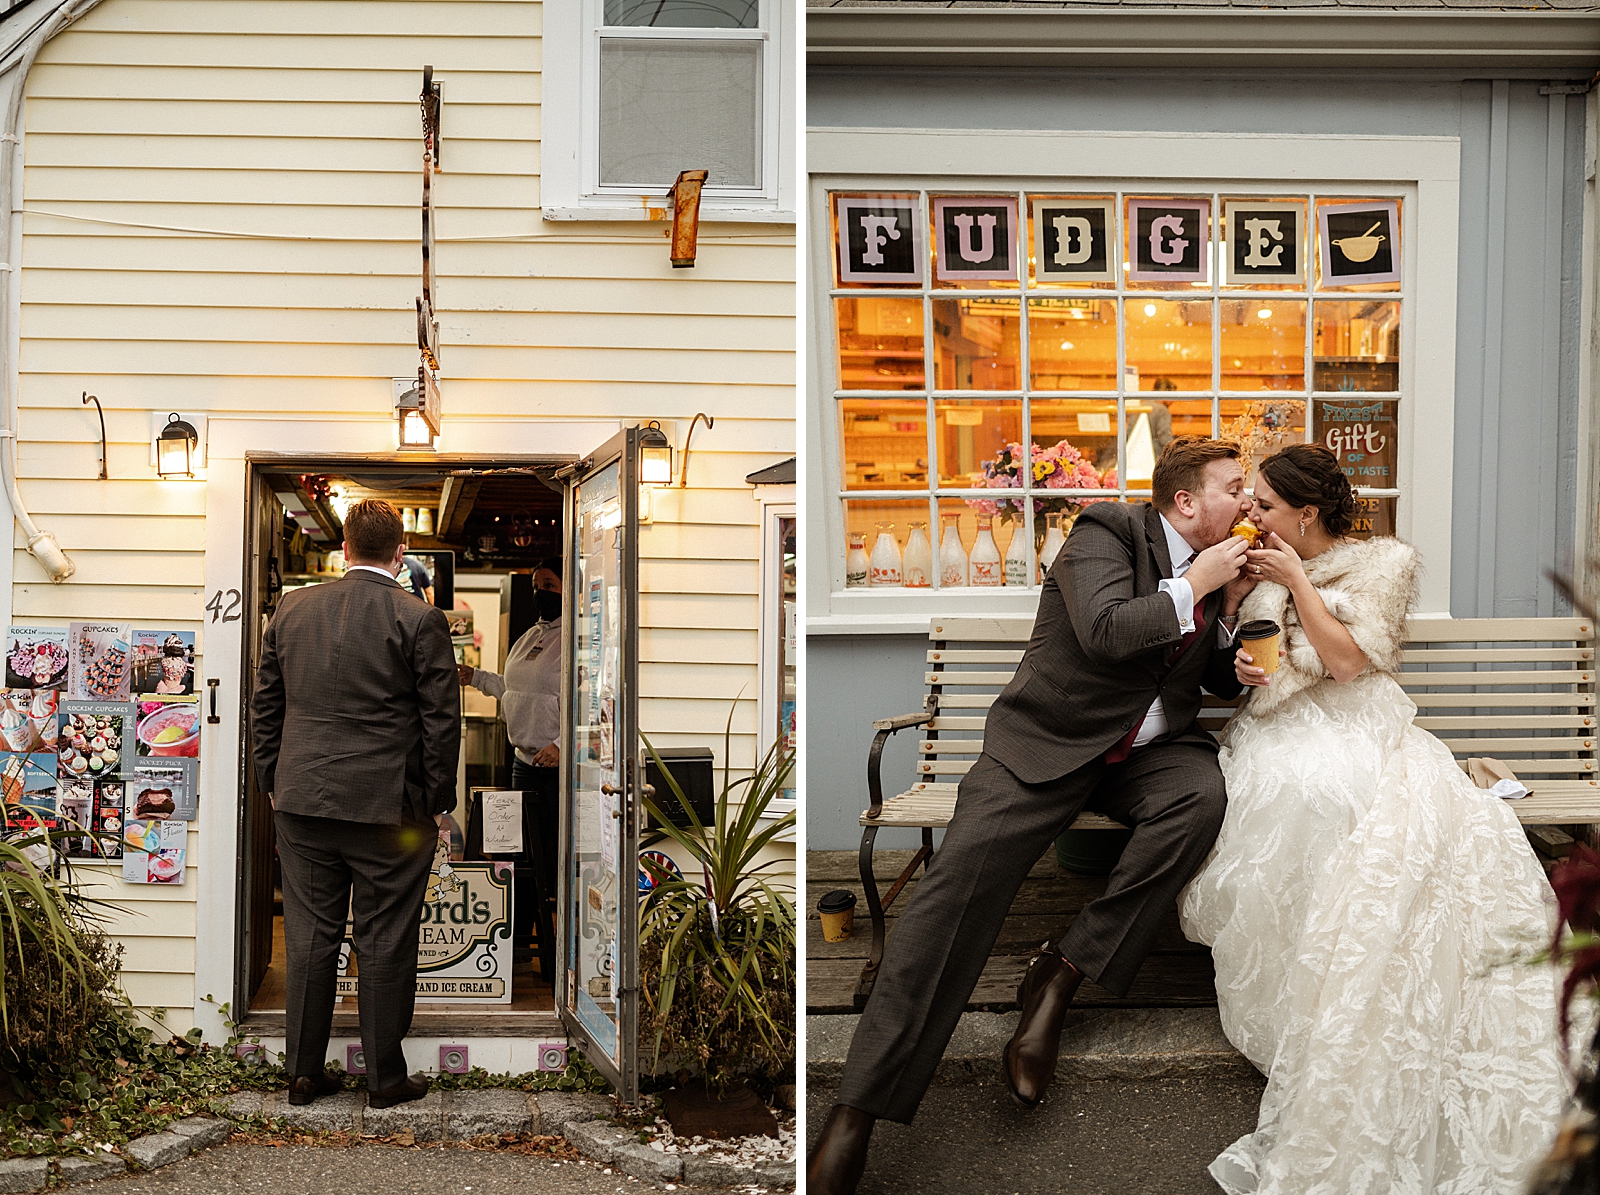 Bride and Groom grabbing baked goods and coffee at local shop